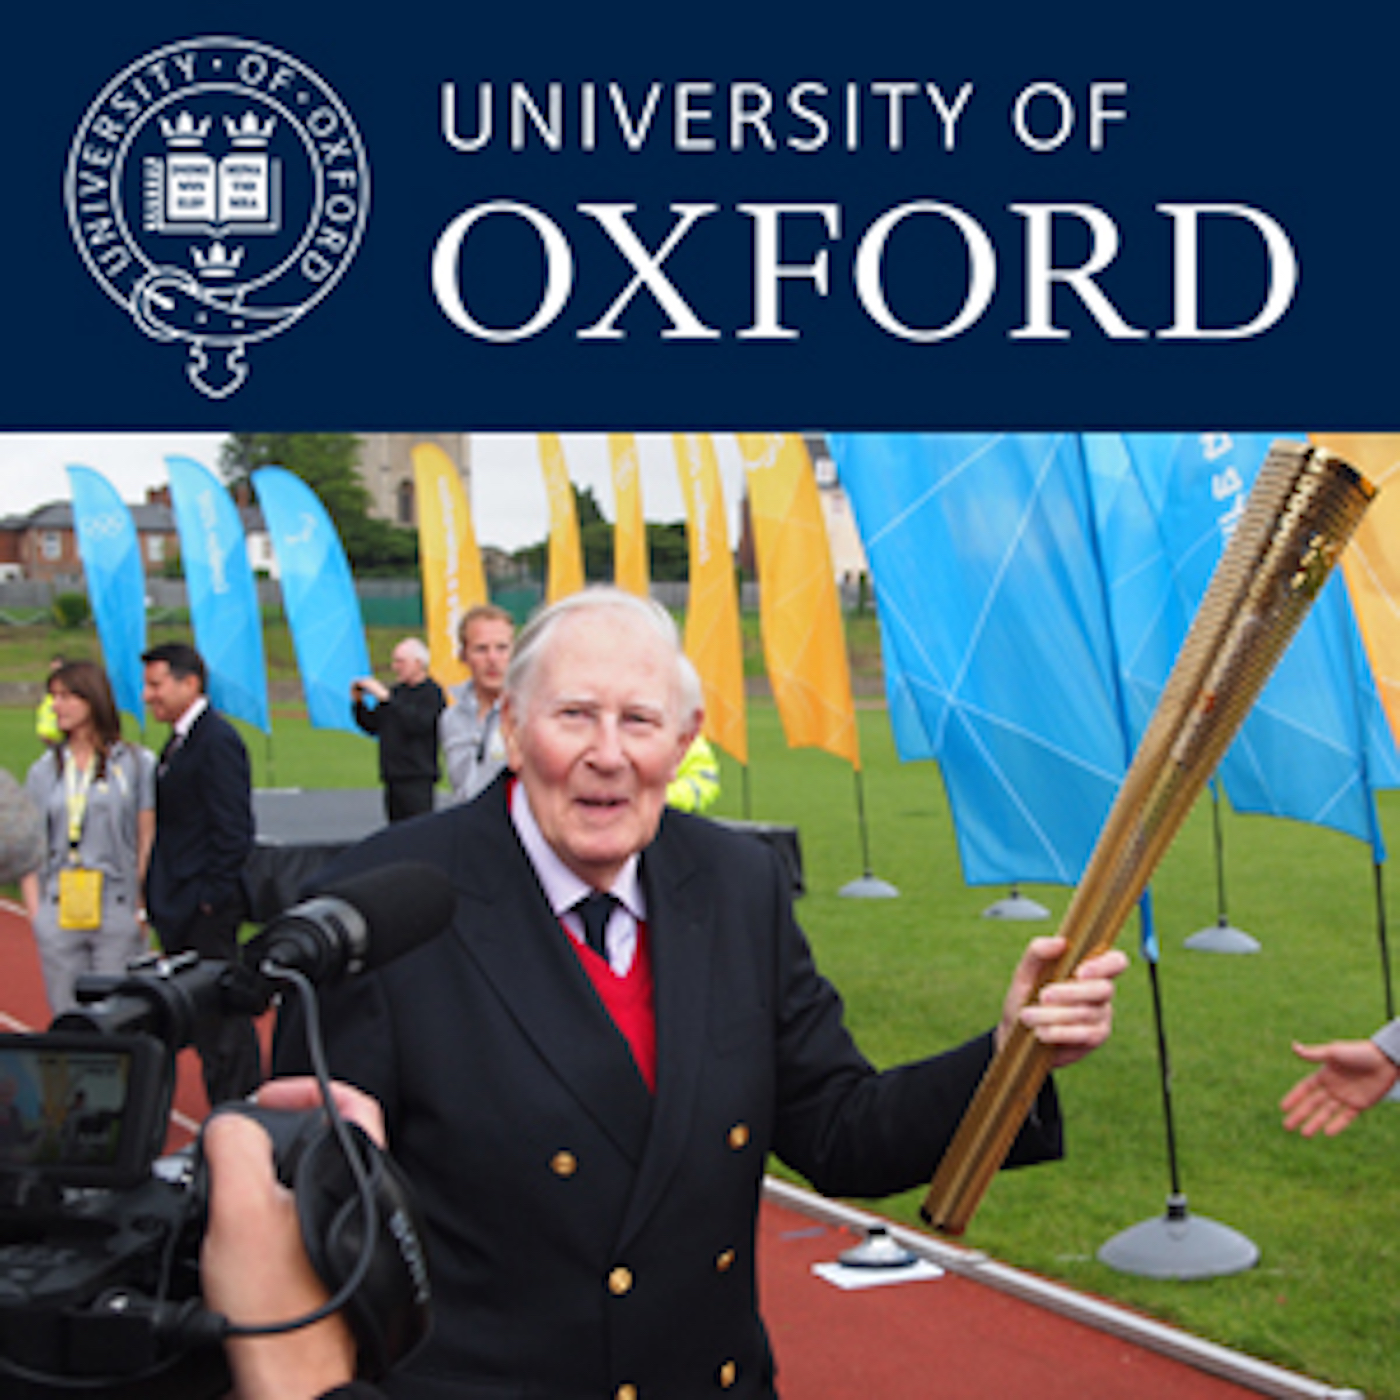 The Olympics at Oxford